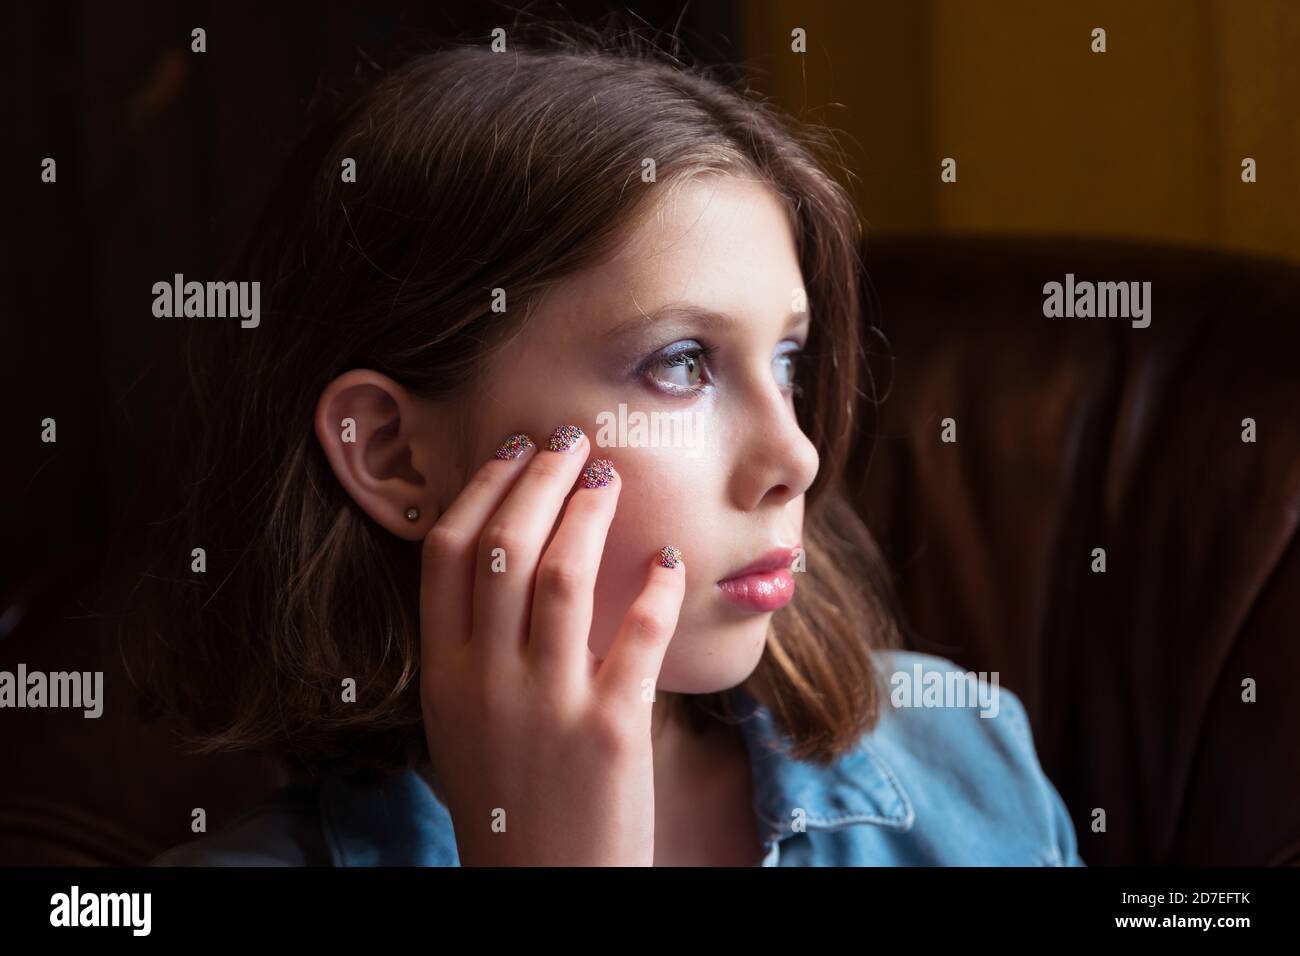 A natural portrait of a tween or teen girl with hand on face sat in an armchair, looking contemplative Stock Photo